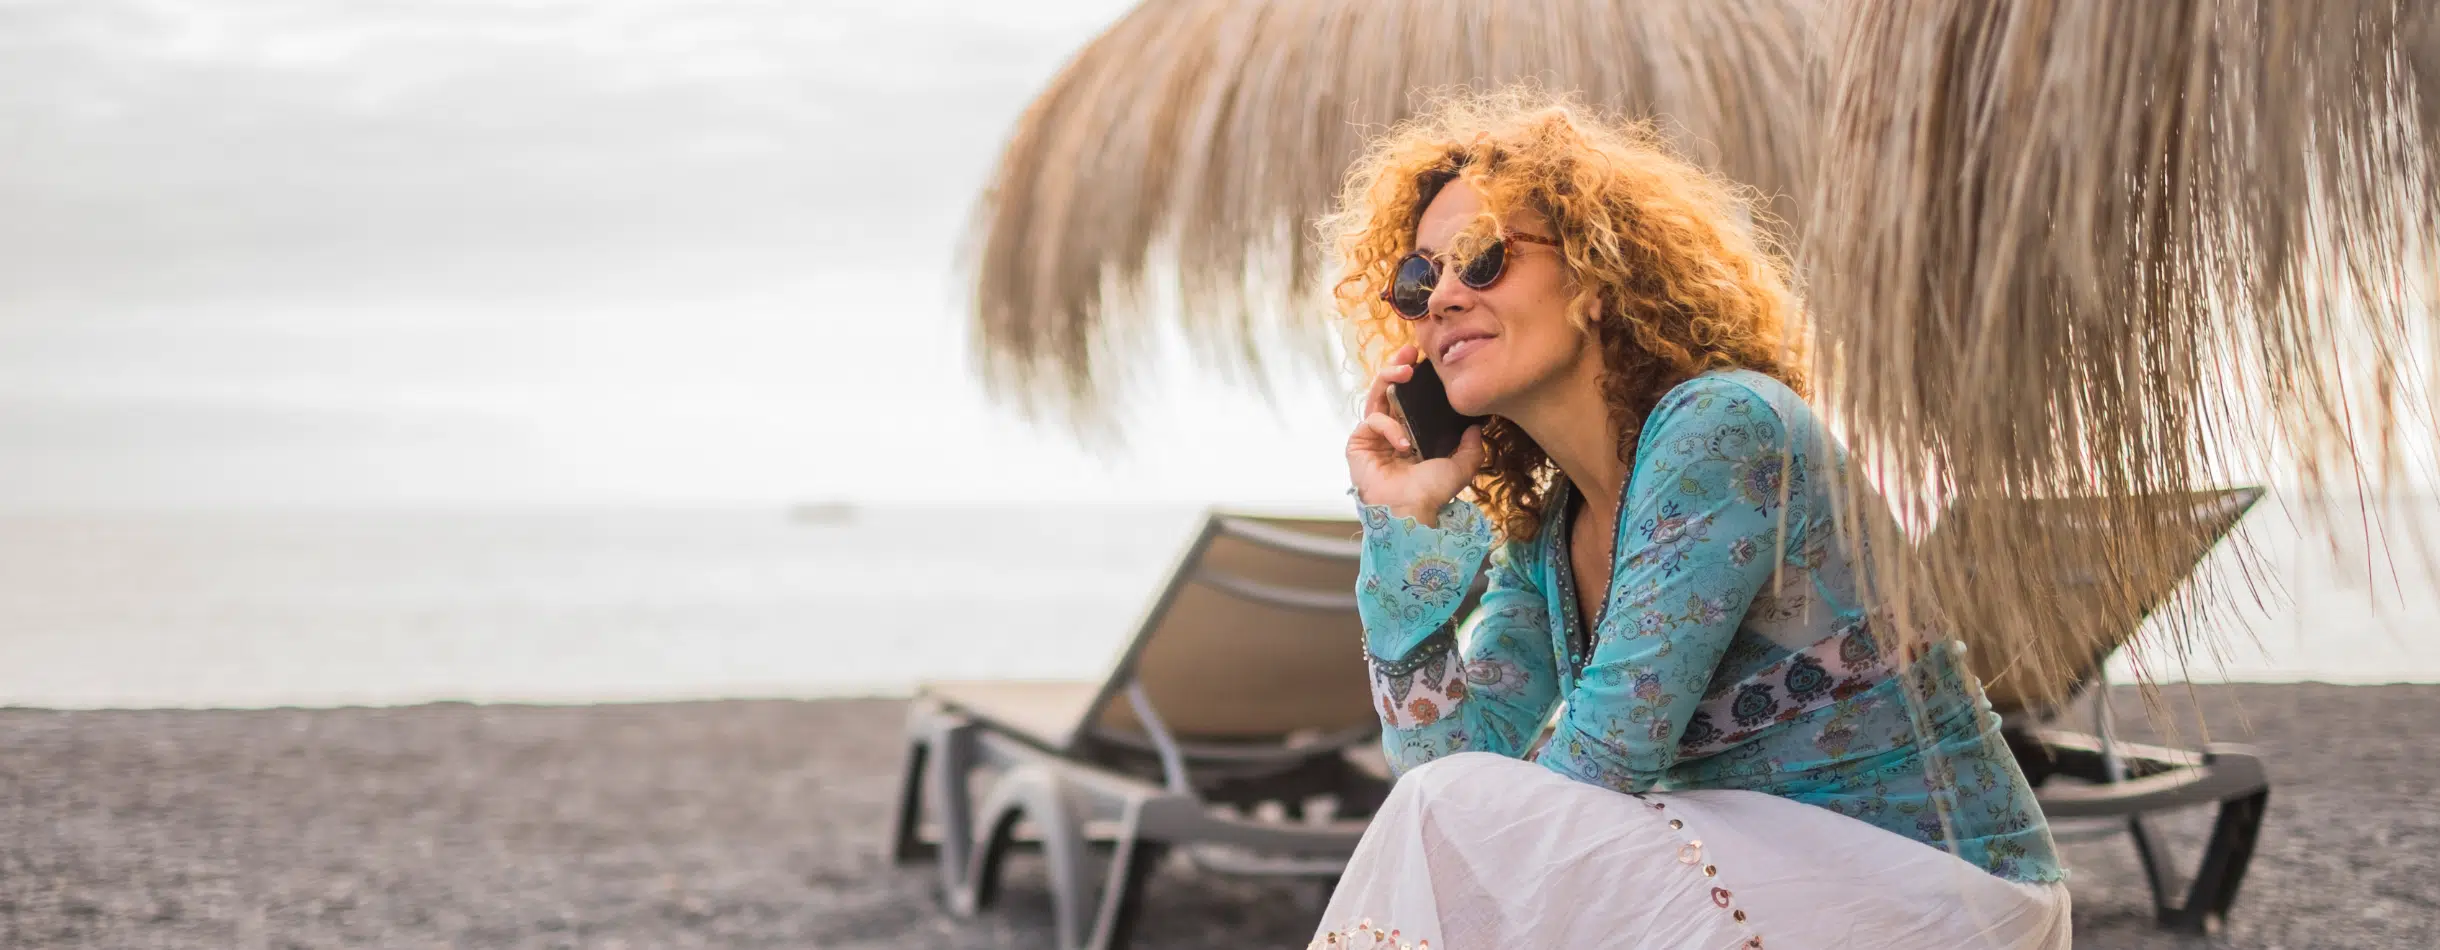 A woman on the beach gazes in the distance while listening attentively on the phone